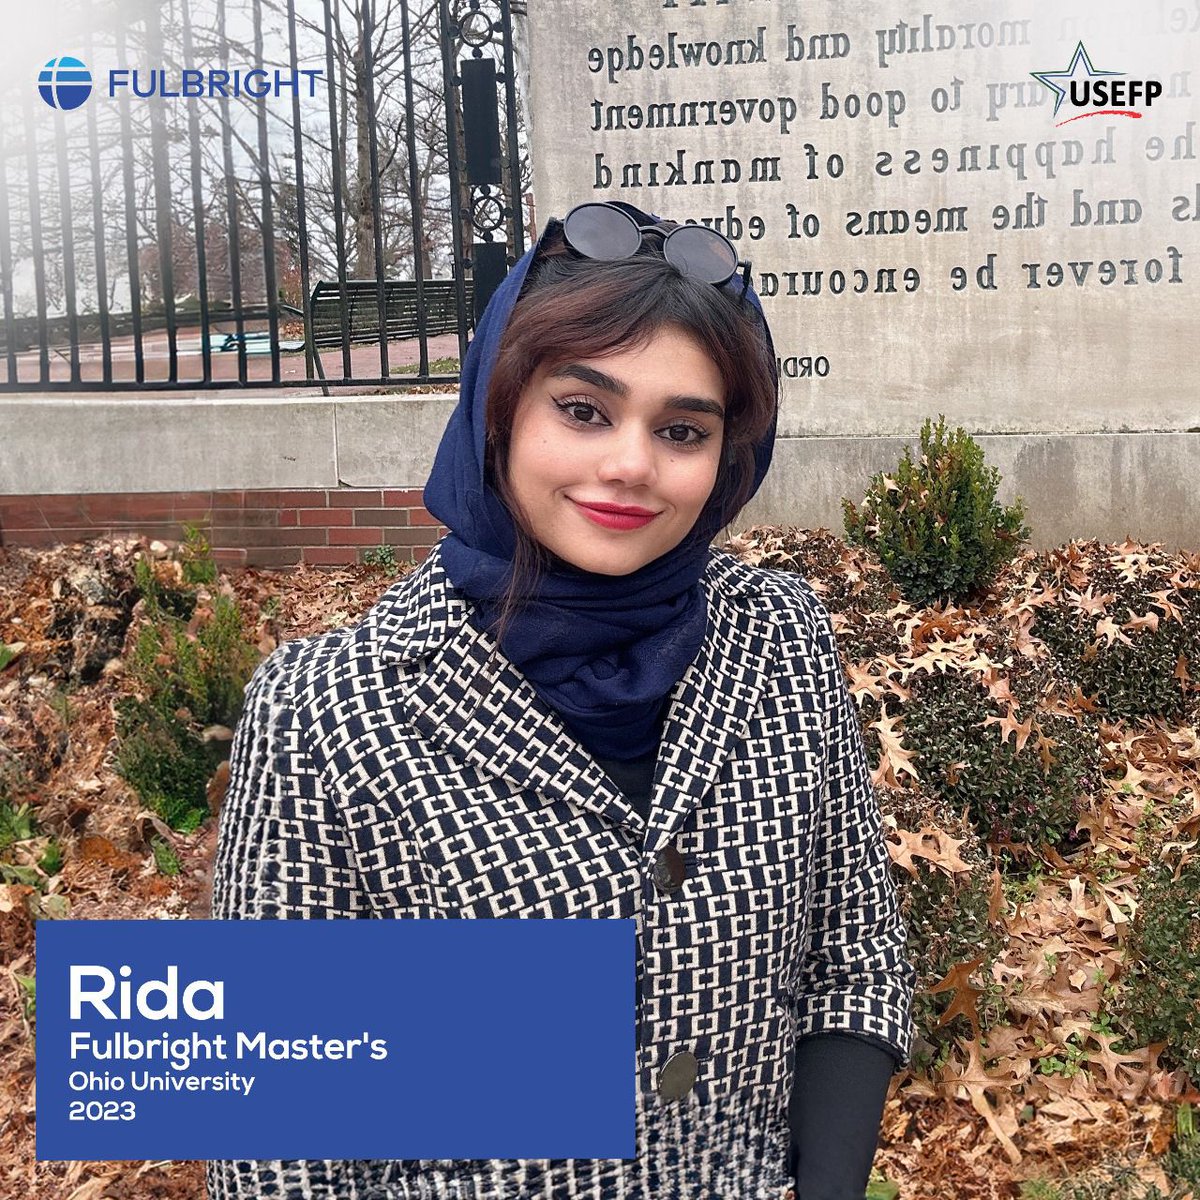 Rida, a UGRAD alumna from Balochistan, has been awarded multiple grants for her volunteer work and community development initiatives focused on environmental protection and mental health awareness. She is currently enrolled at Ohio University in the #Fulbright Program. #USEFP